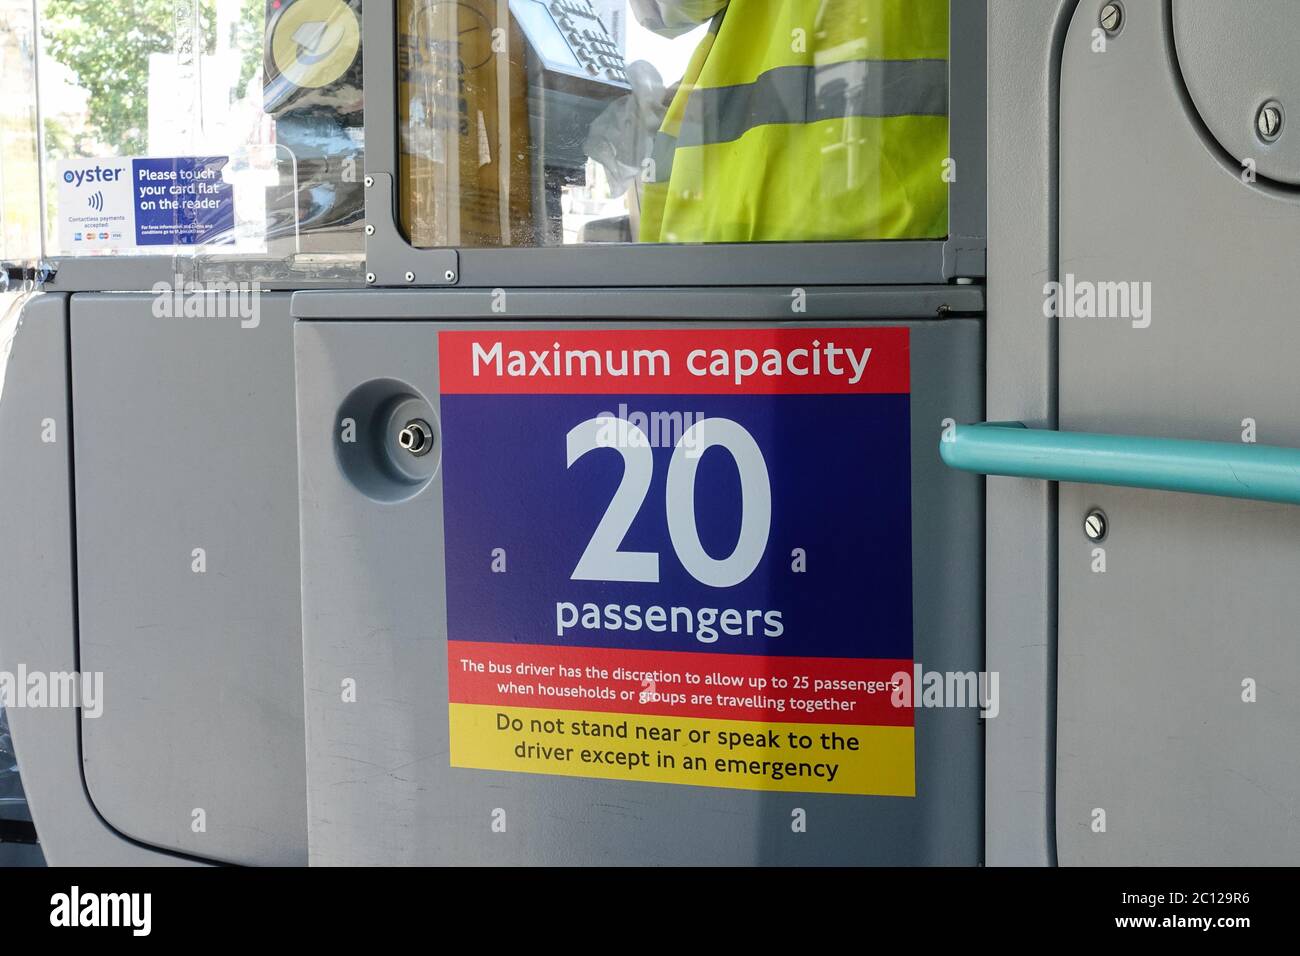 London, UK. 13th June, 2020. New Transport for London measures in London buses. TfL has introduced new limits on the number of people allowed on buses. 20 people are allowed on board, at one given time, on double decker buses. 6 to 10 people are allowed on the smaller, single decker buses. Credit: Marcin Rogozinski/Alamy Live News Stock Photo